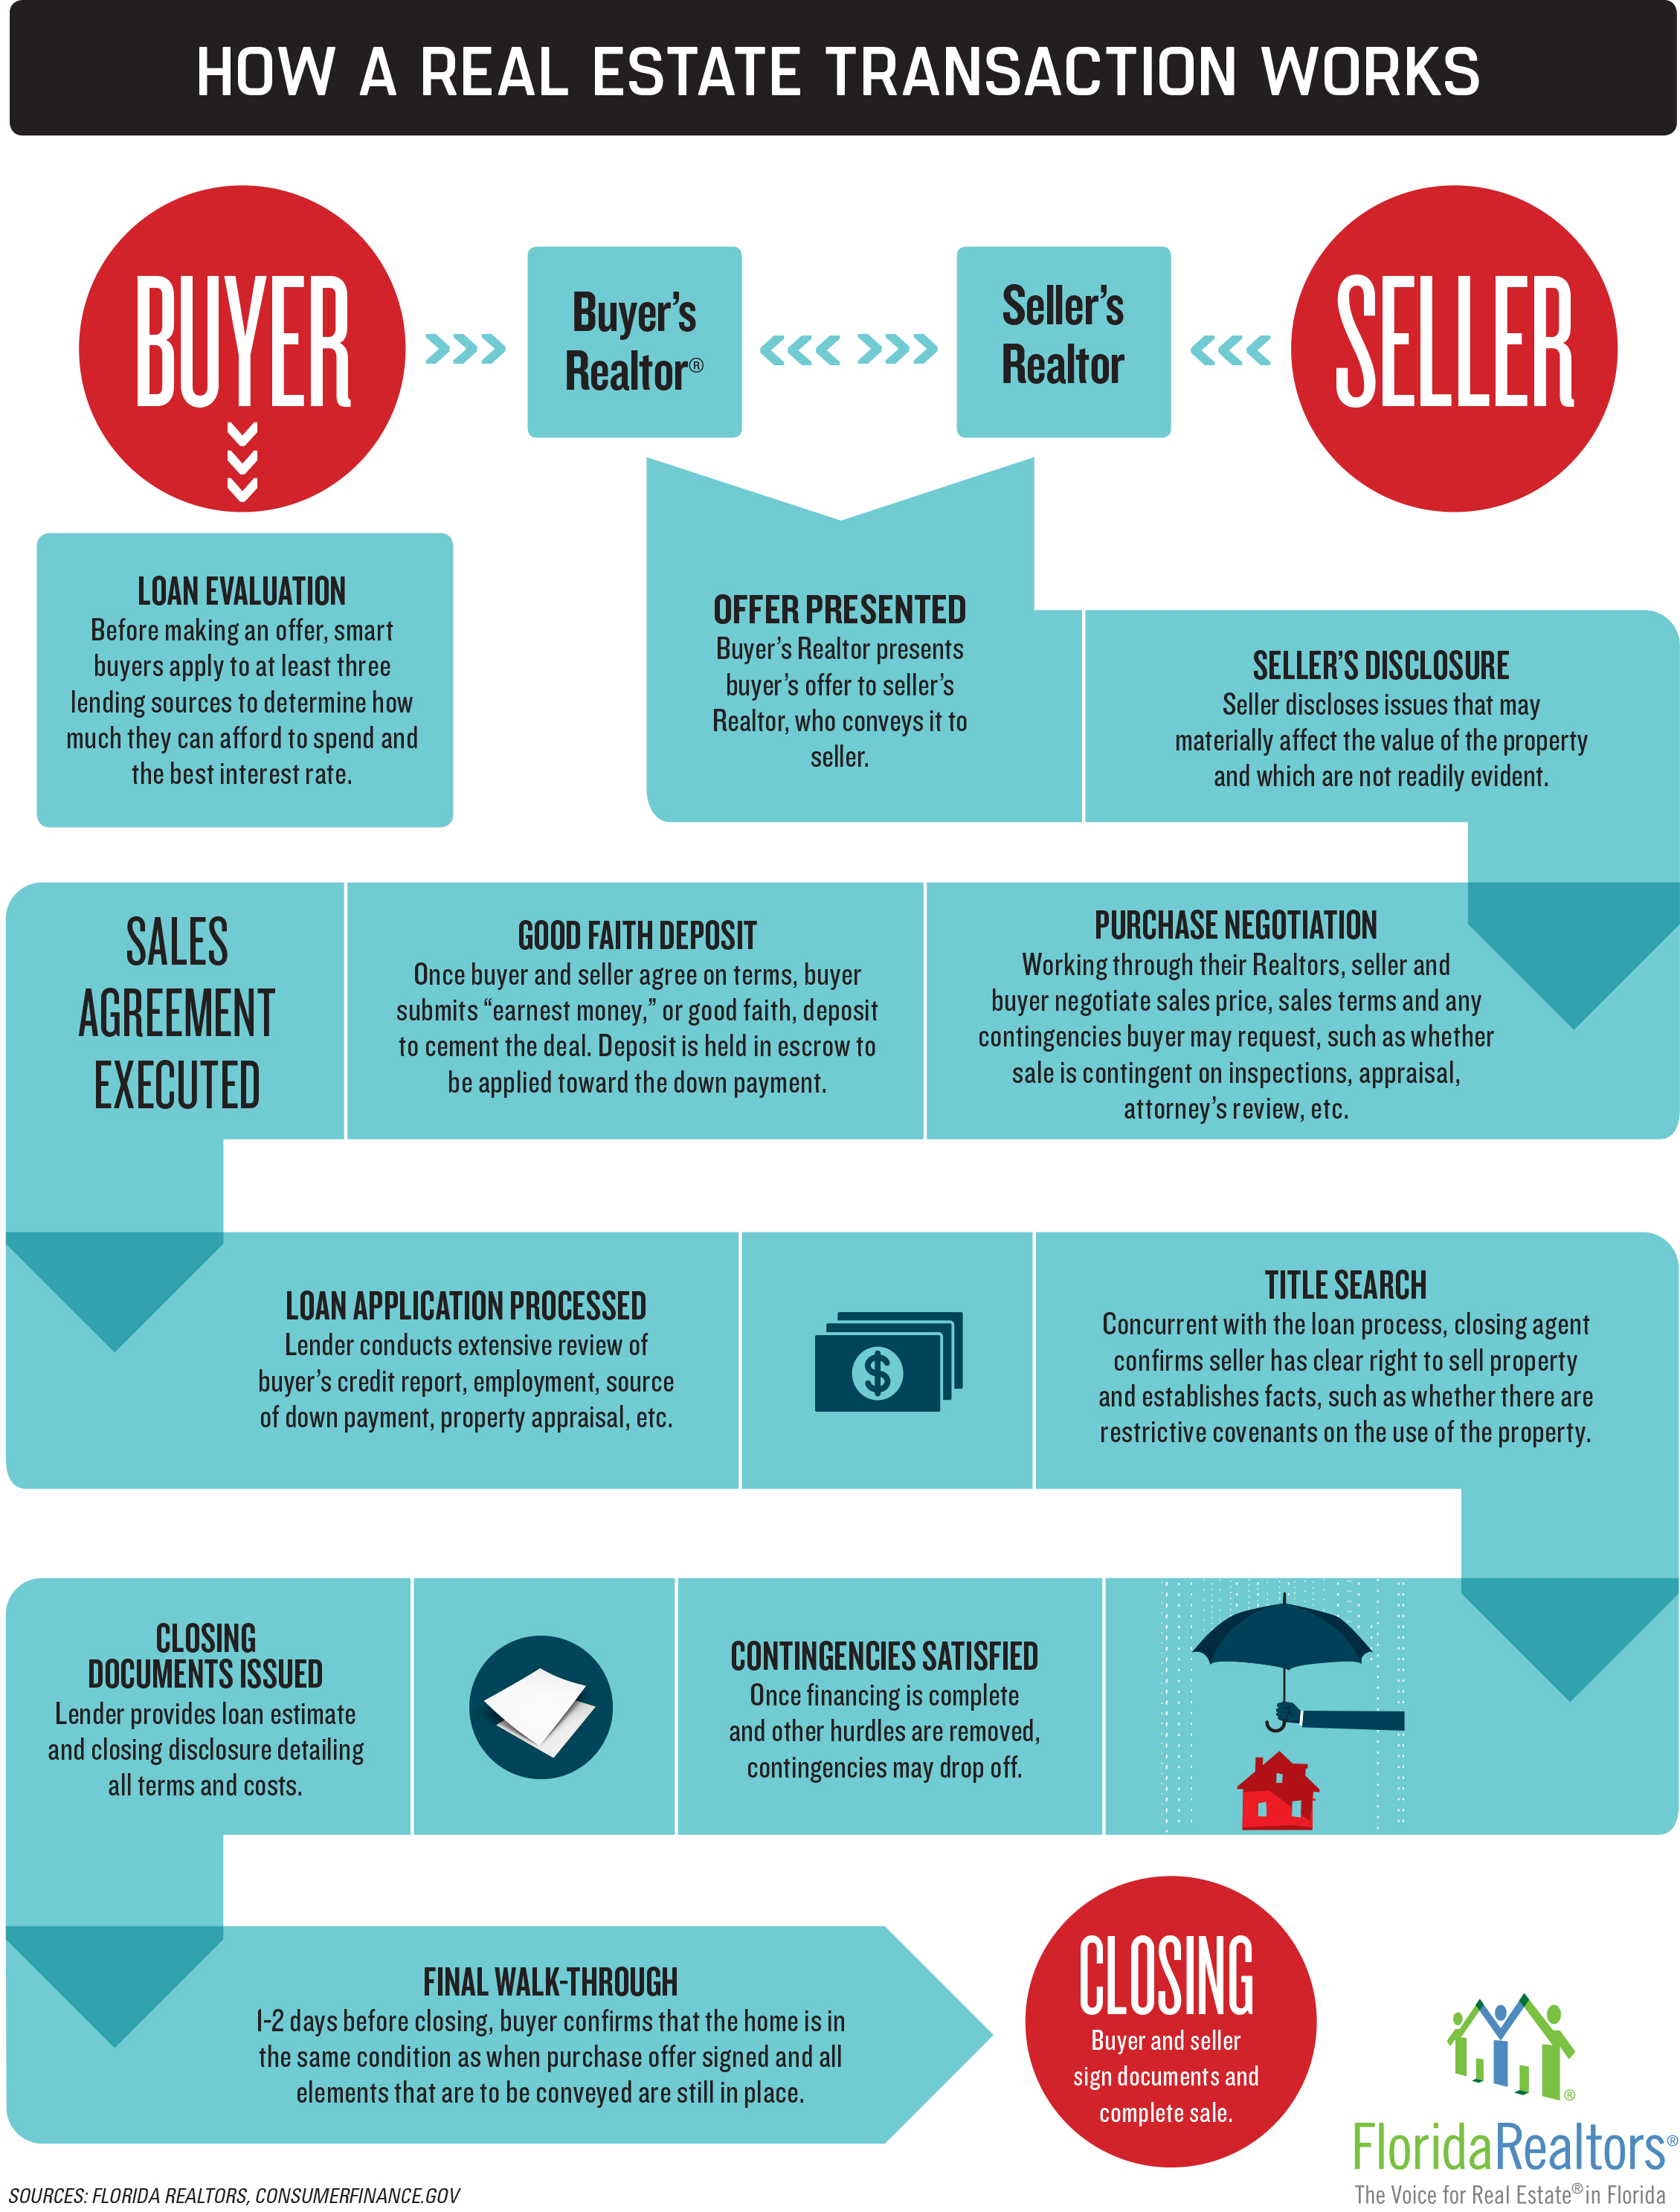 Very complicated infographic of the process of buying a home. It's too long to describe, which implies you need to hire a real estate agent to buy a home.